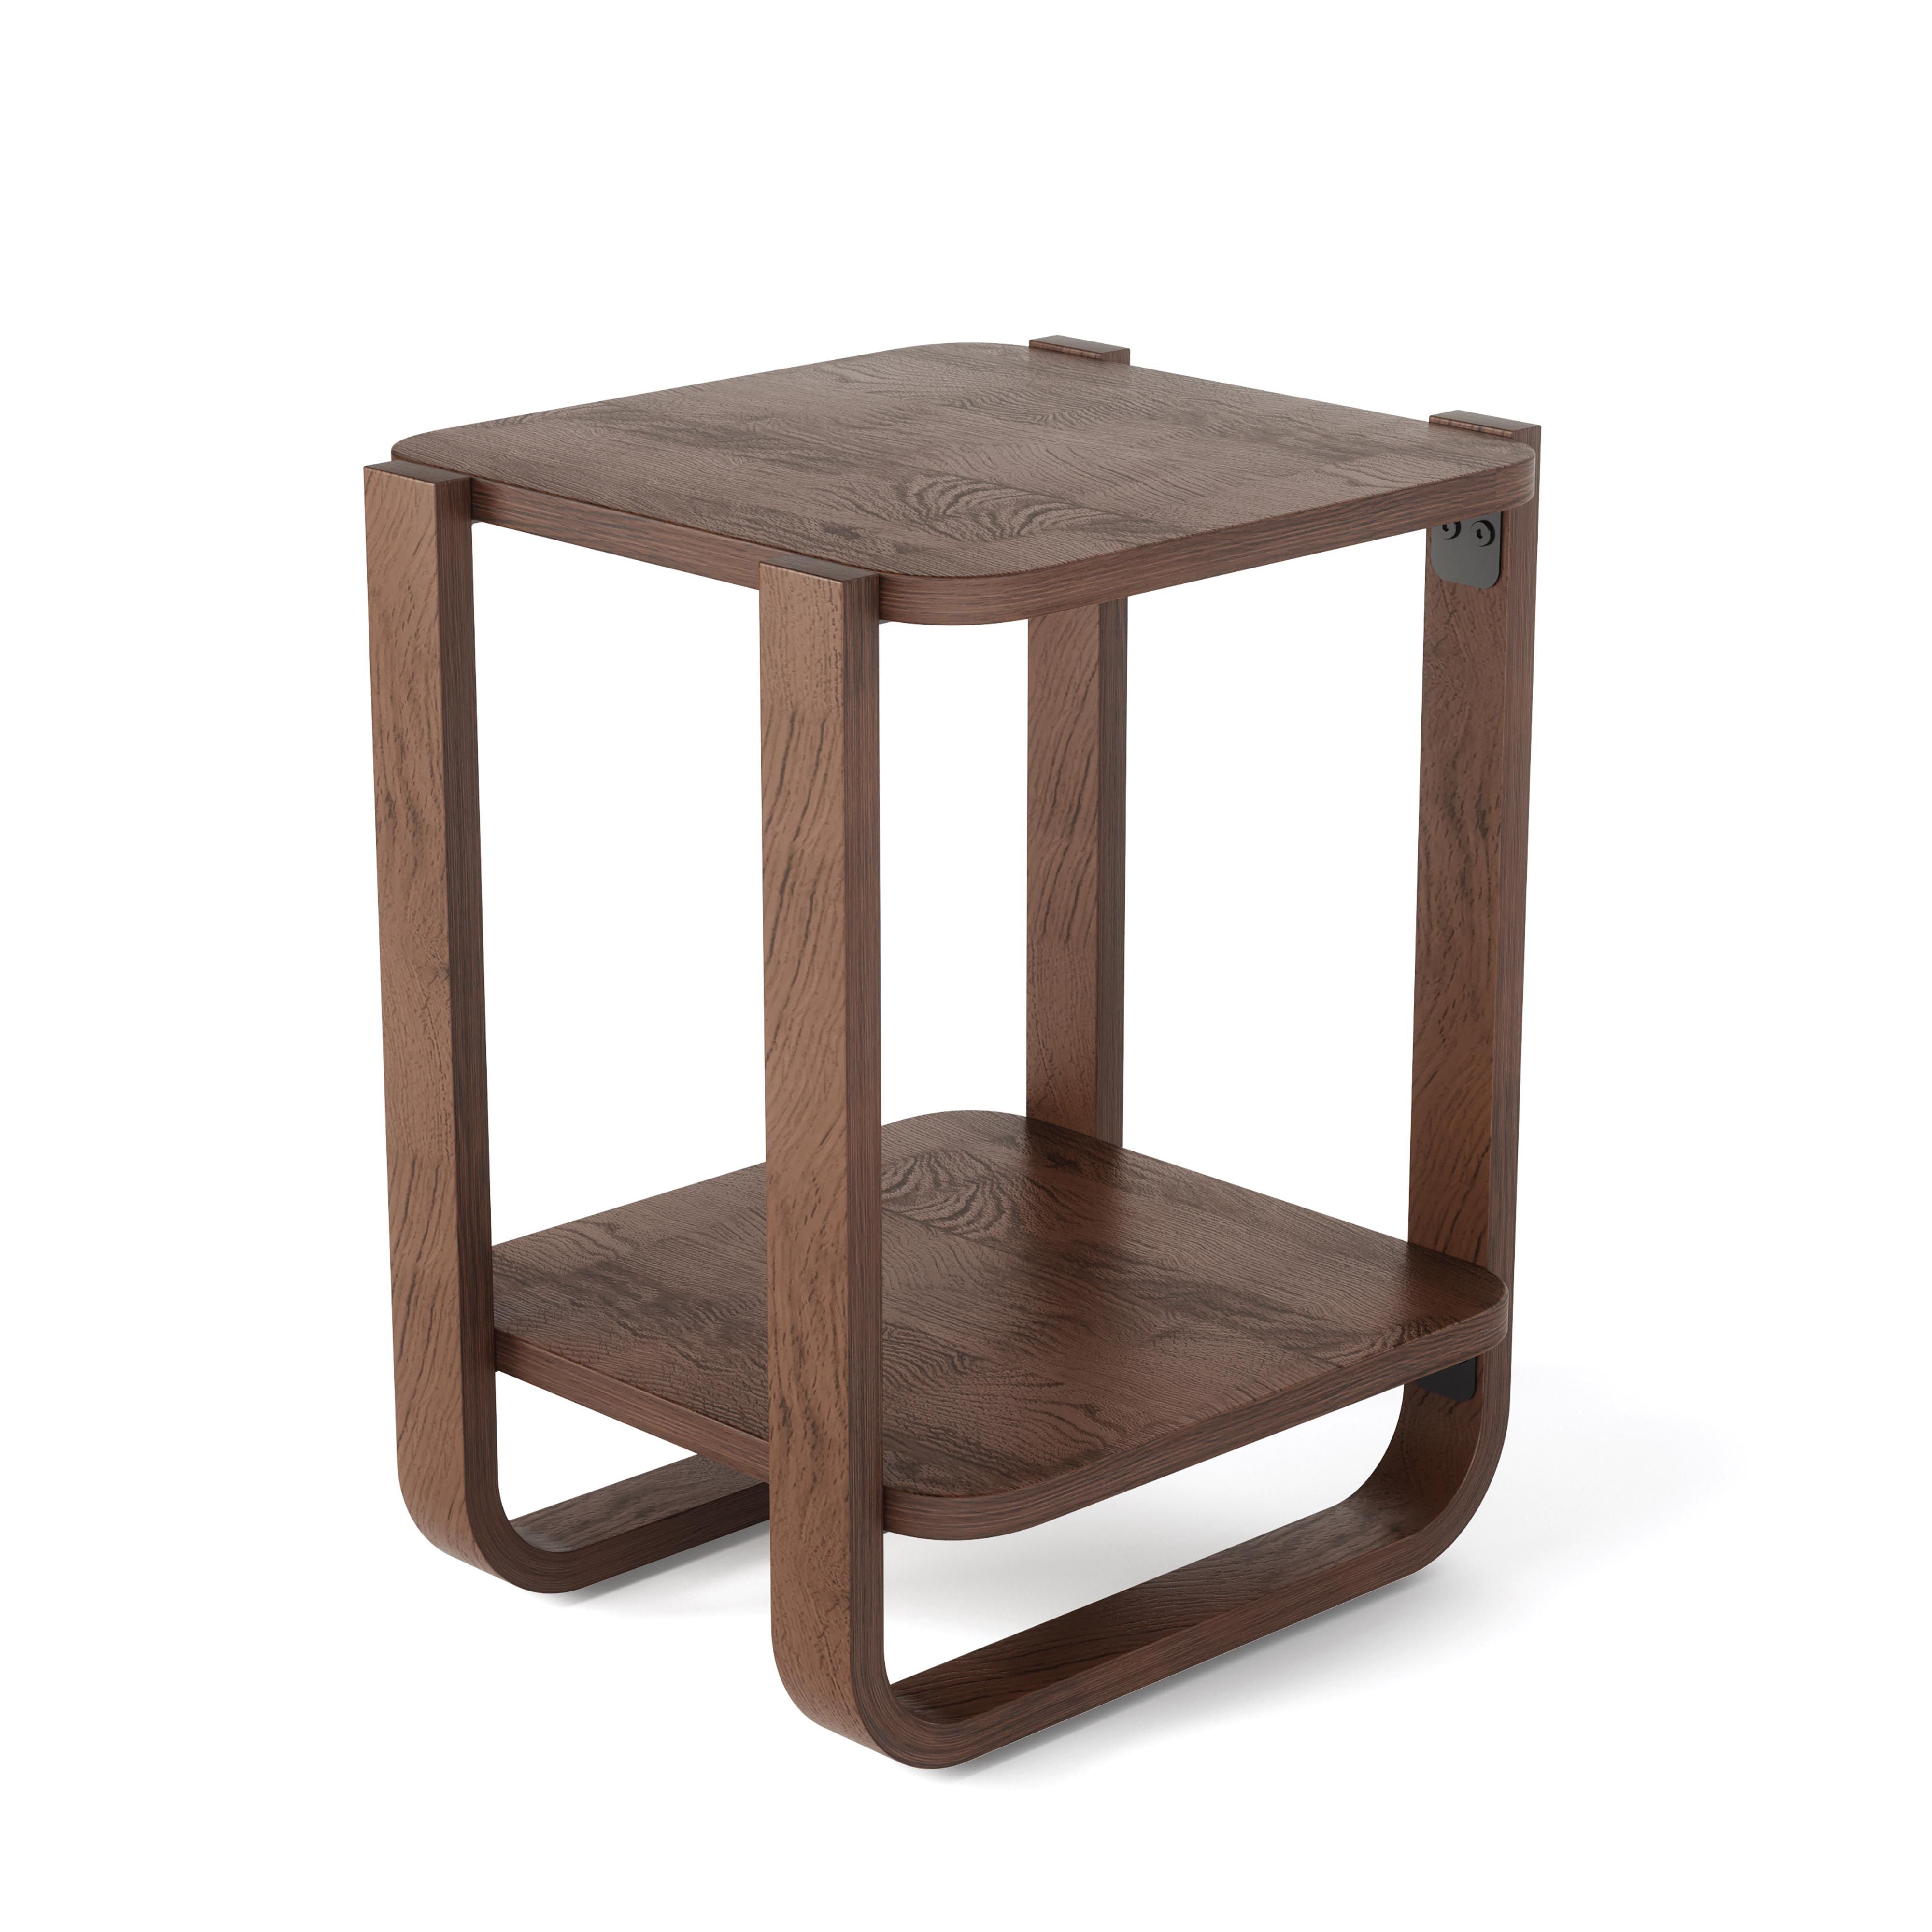 Aged Walnut Bellwood Side Table By Umbra Bellwood features soft bent-wood legs and two open tiers, bringing a warm, airy atmosphere to any living room, bedroom or entryway. This multi-purpose side table boasts ample storage capacity, supporting 90.7 kg an